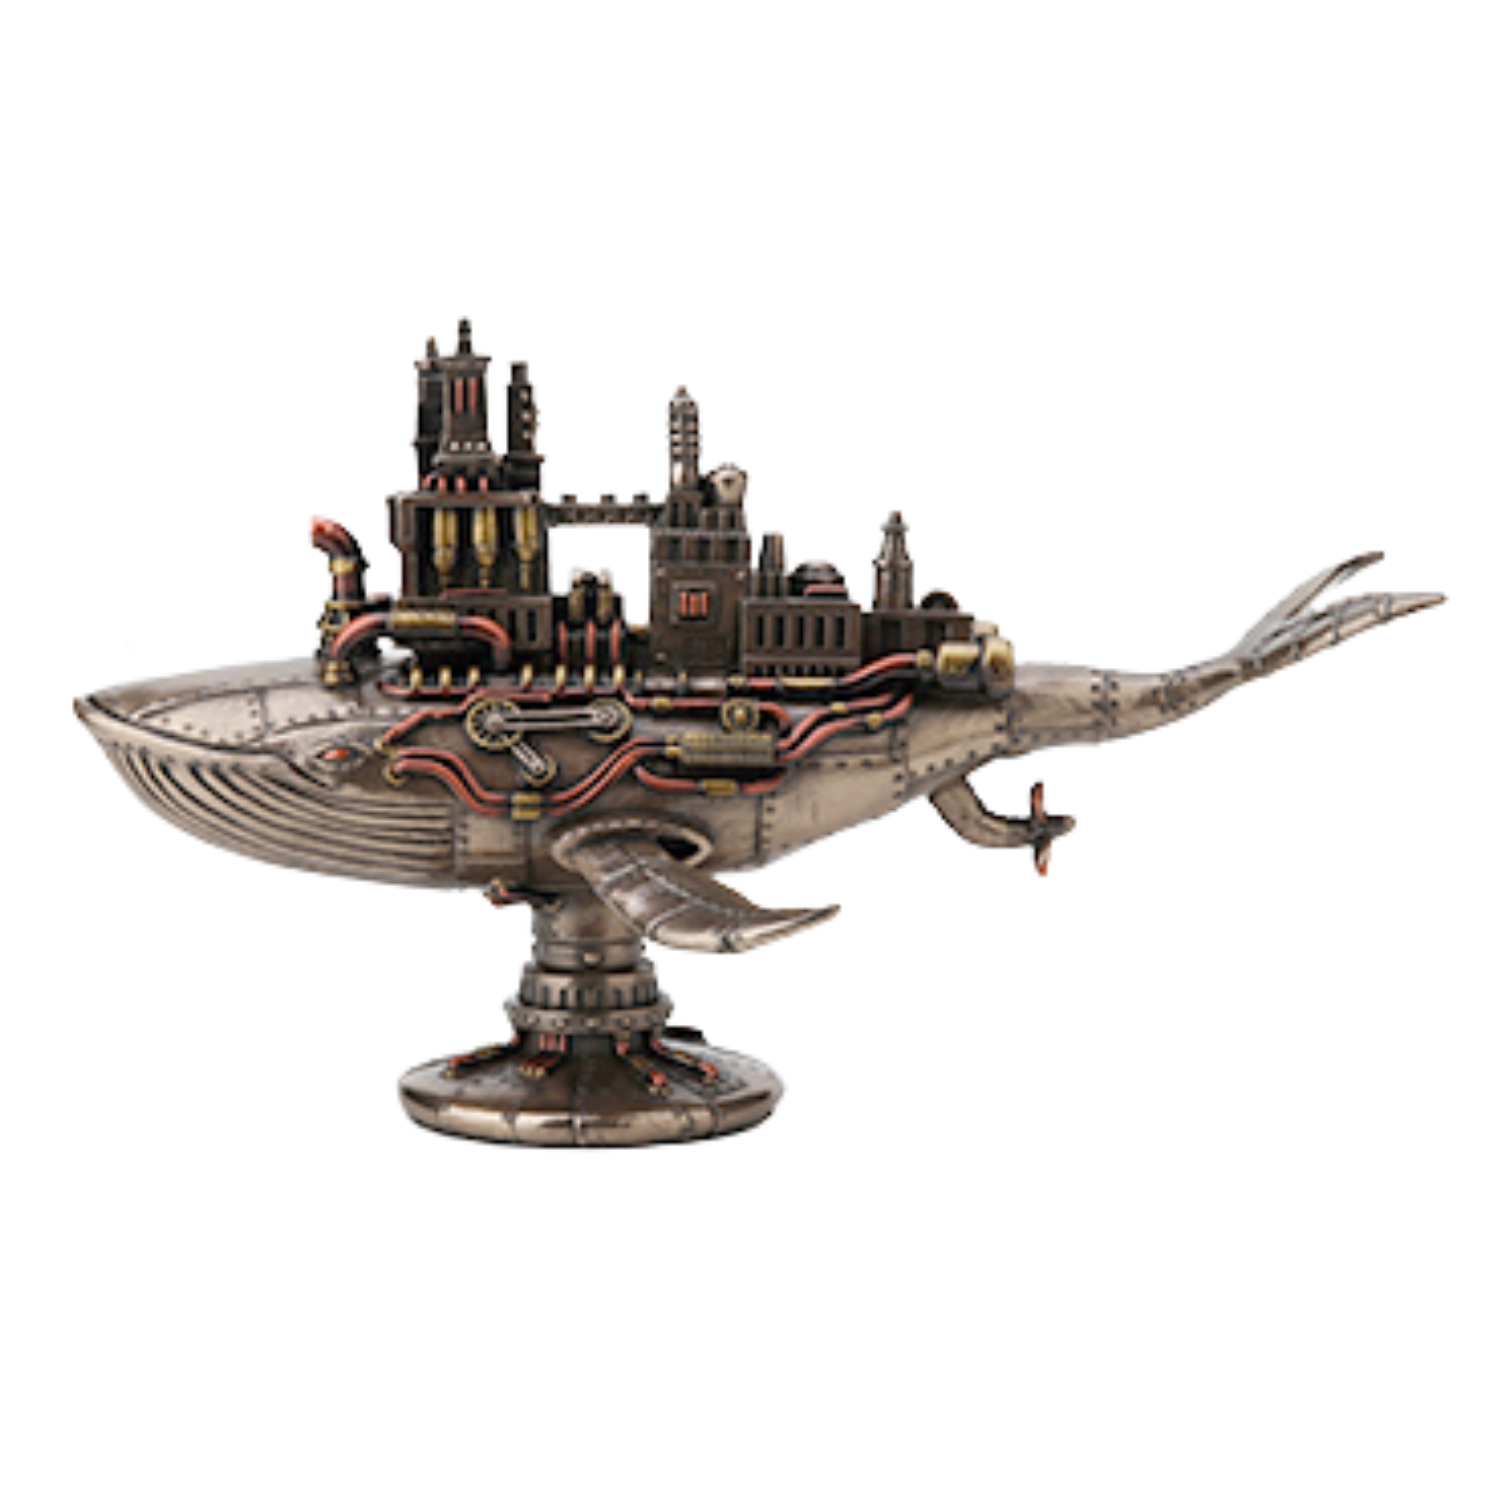 Steampunk Fifty Two Hertz Galactic Colony Whale Figurine